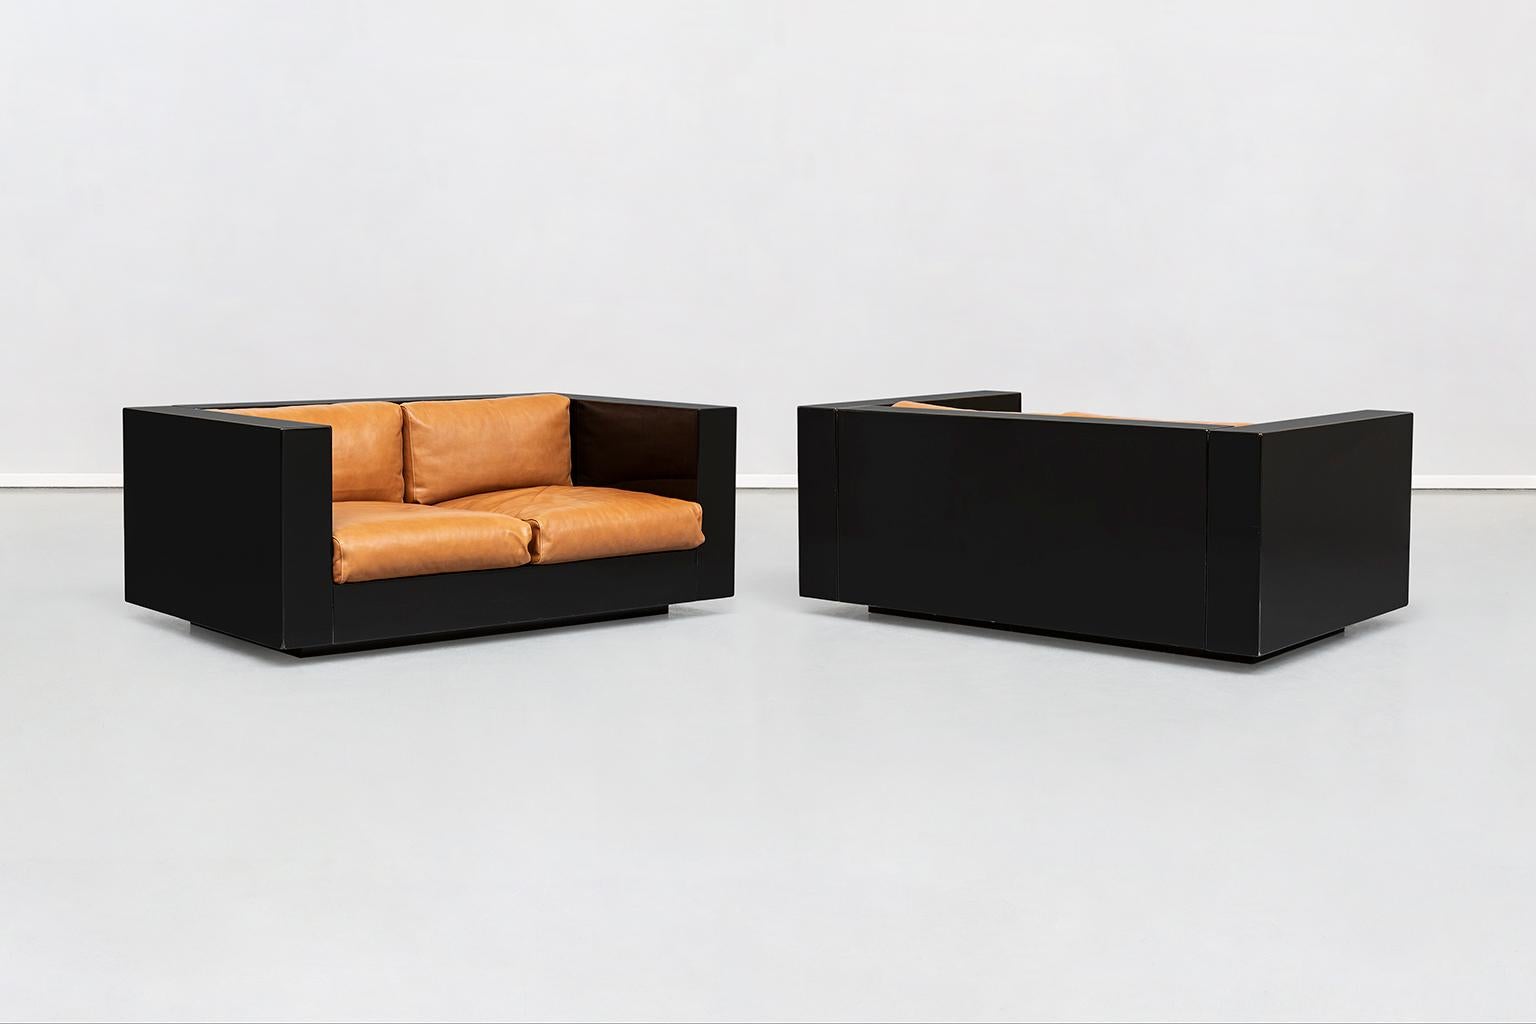 Italian two-seater Saratoga sofas, by Vignelli associates for Poltronova, 1964
Two-seater sofas with rigid structure, made by assembling four elements of equal thickness, with rounded corners, houses slightly protruding seat cushions. The desired